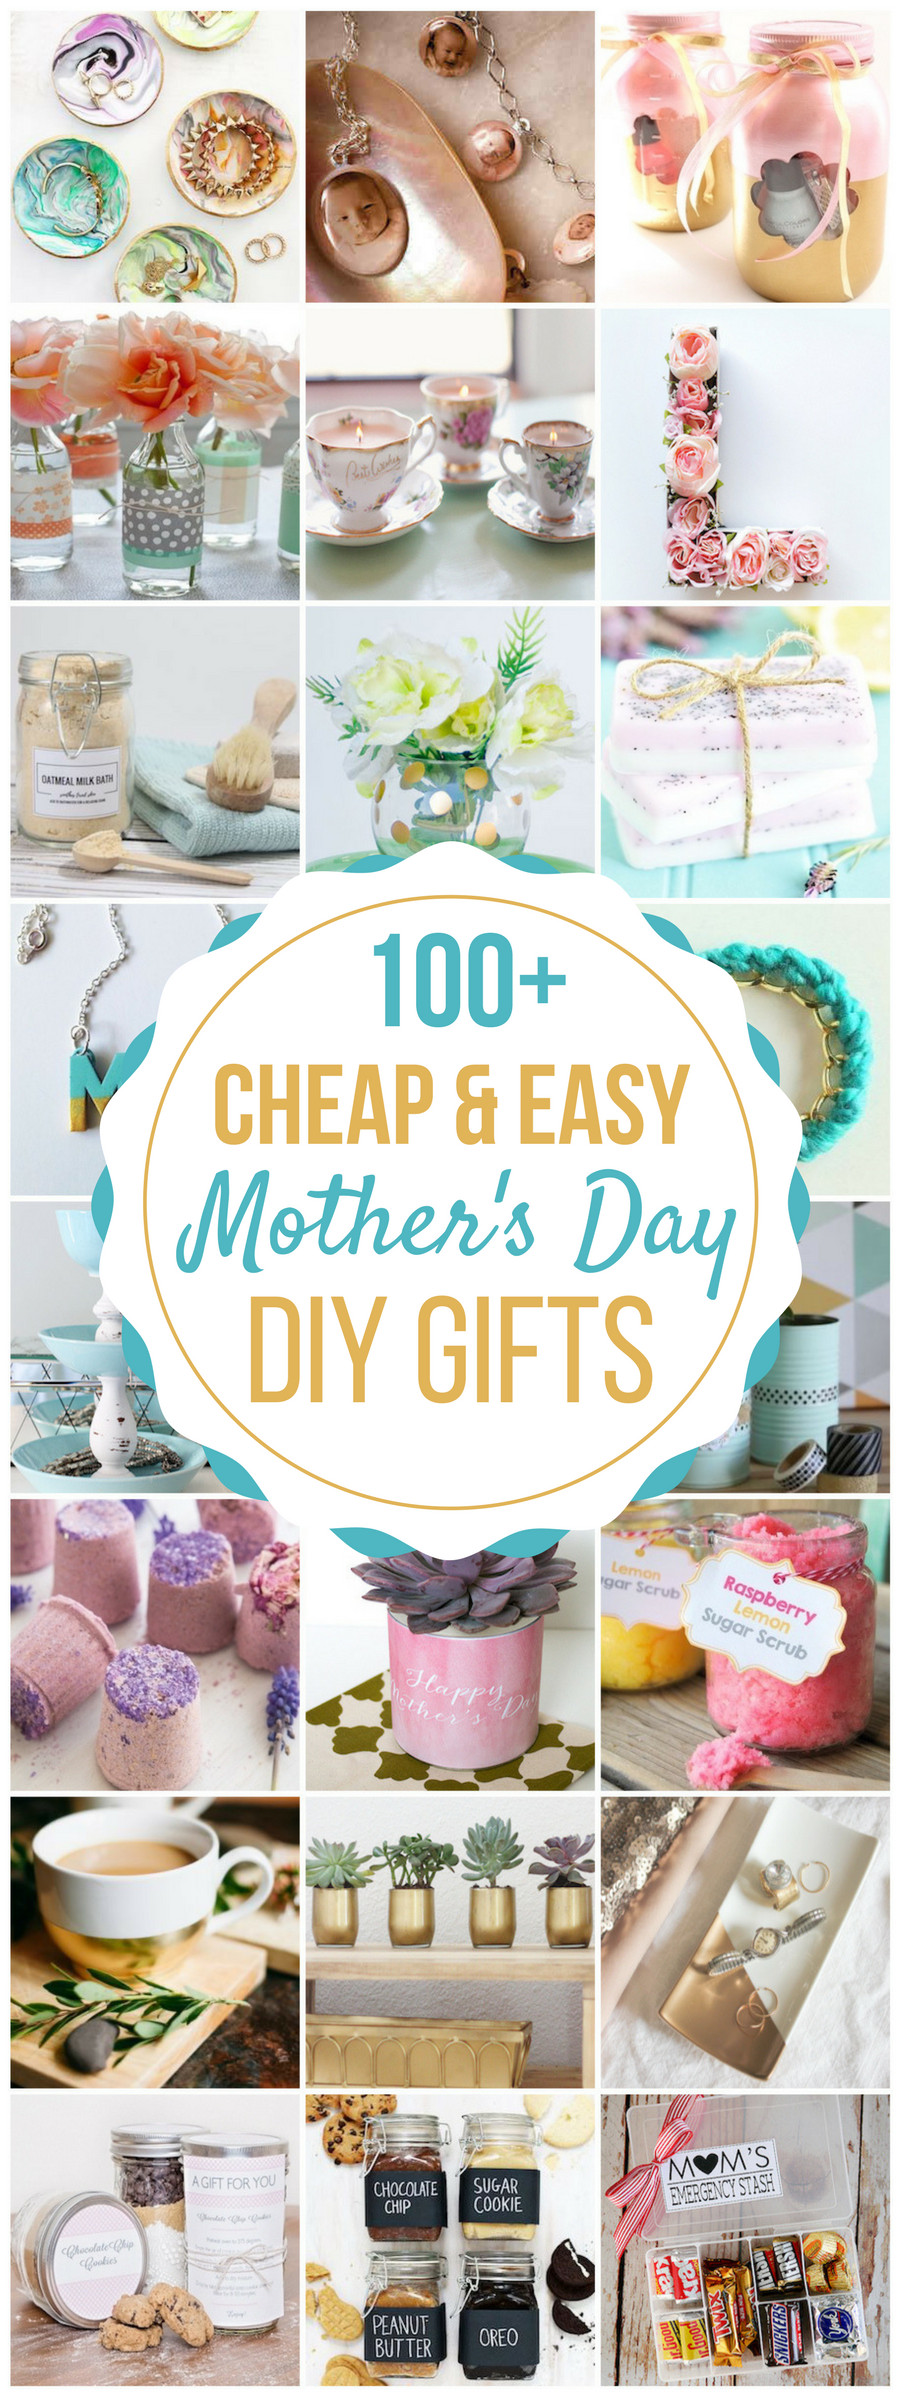 Mothers Day Cheap Gift Ideas
 100 Cheap & Easy DIY Mother s Day Gifts Prudent Penny